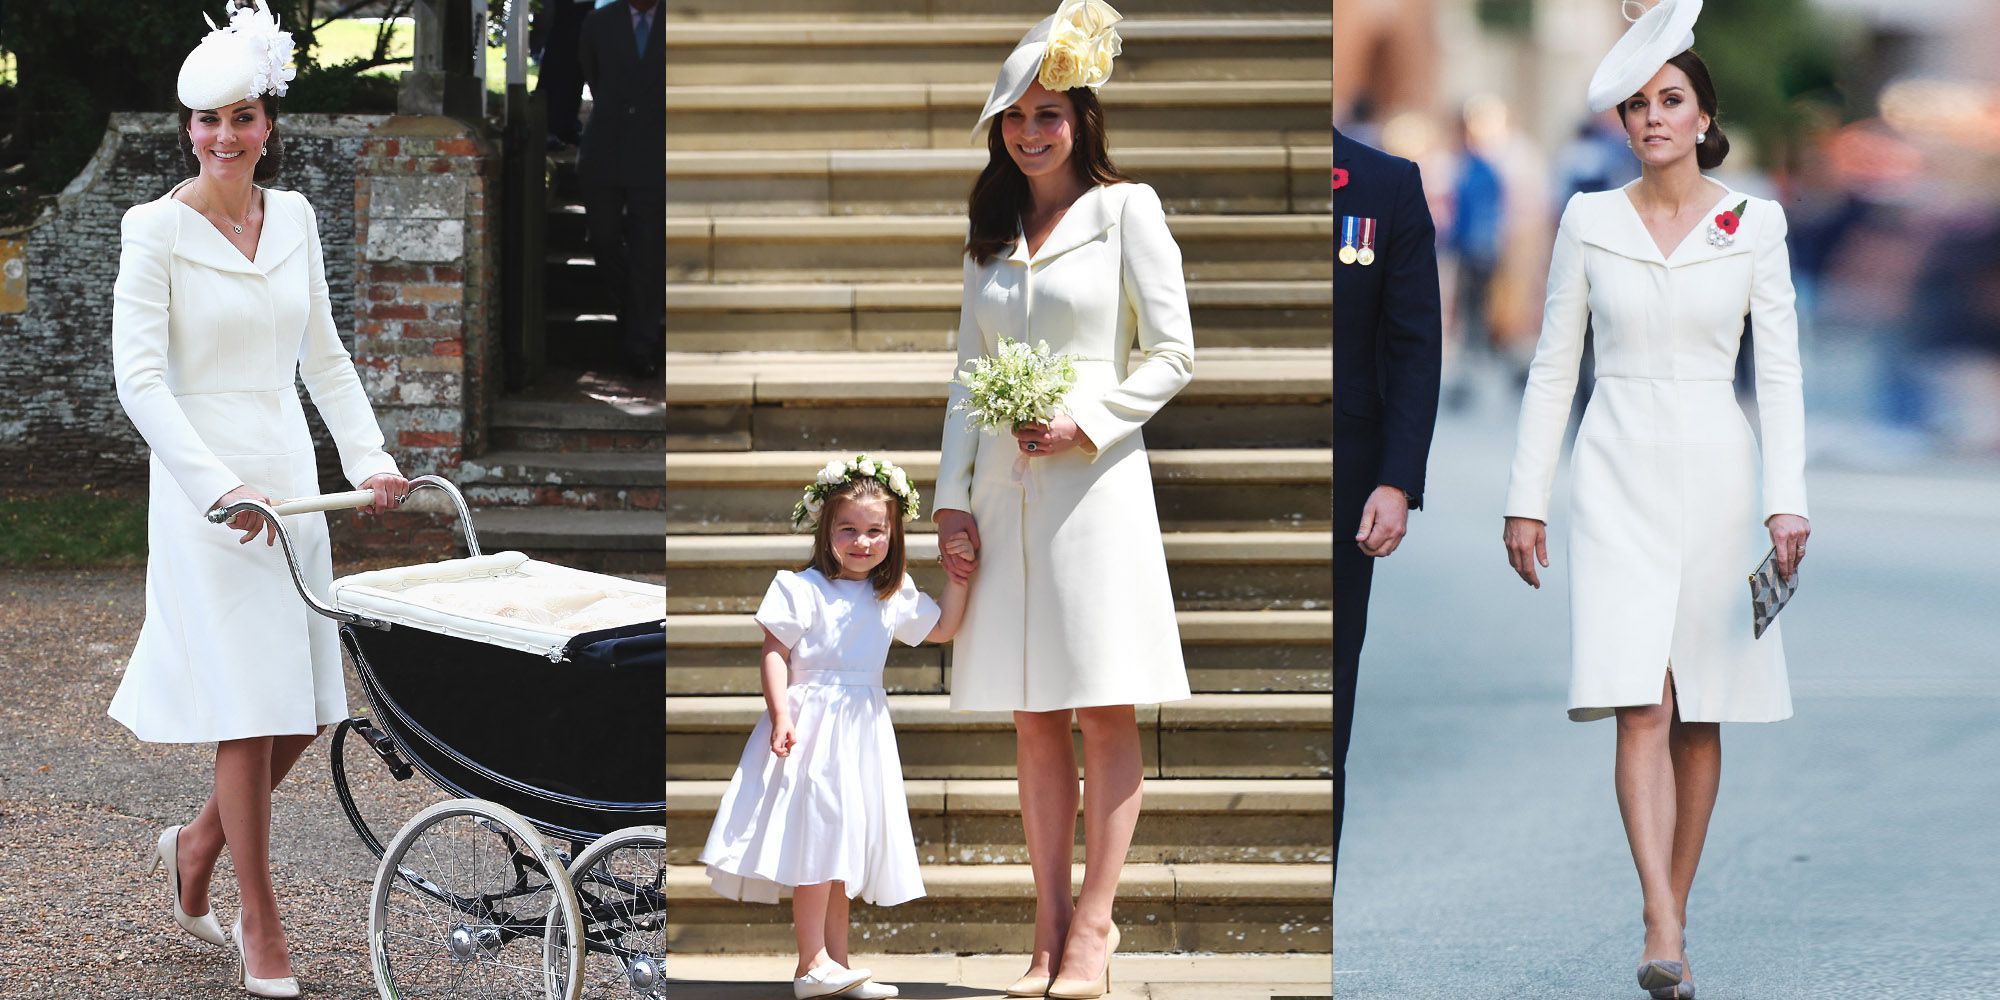 Who wore the best wedding dress: Kate Middleton or Meghan Markle? | The Tylt